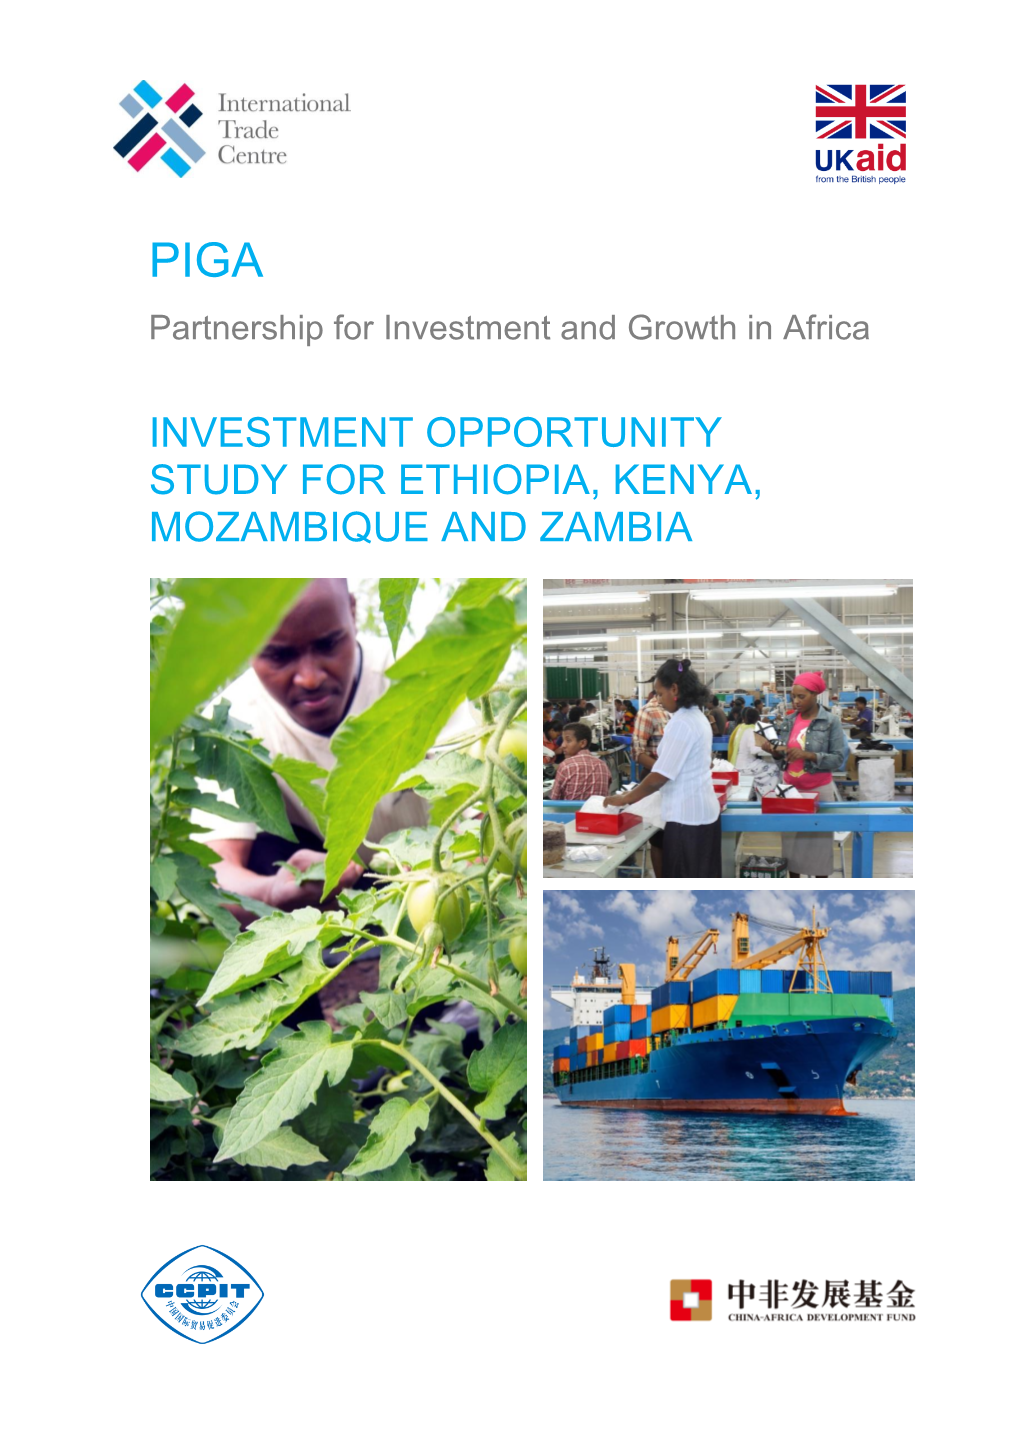 PIGA Investment Opportunity Study for Ethiopia, Kenya, Mozambique And